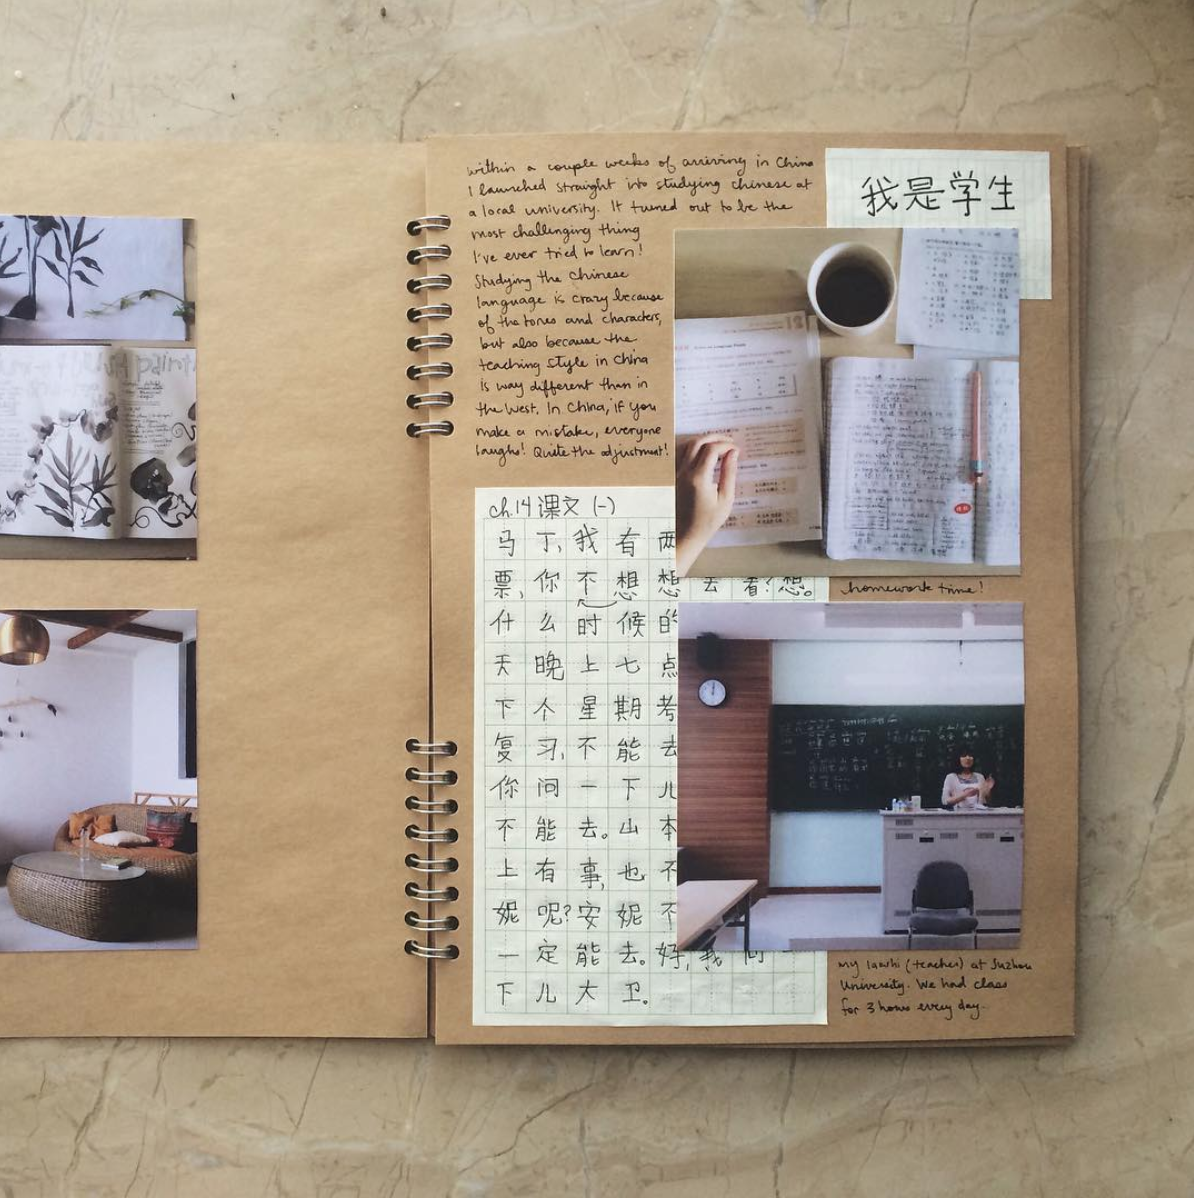 How To Start Scrapbook Journaling - Uniquely Creative